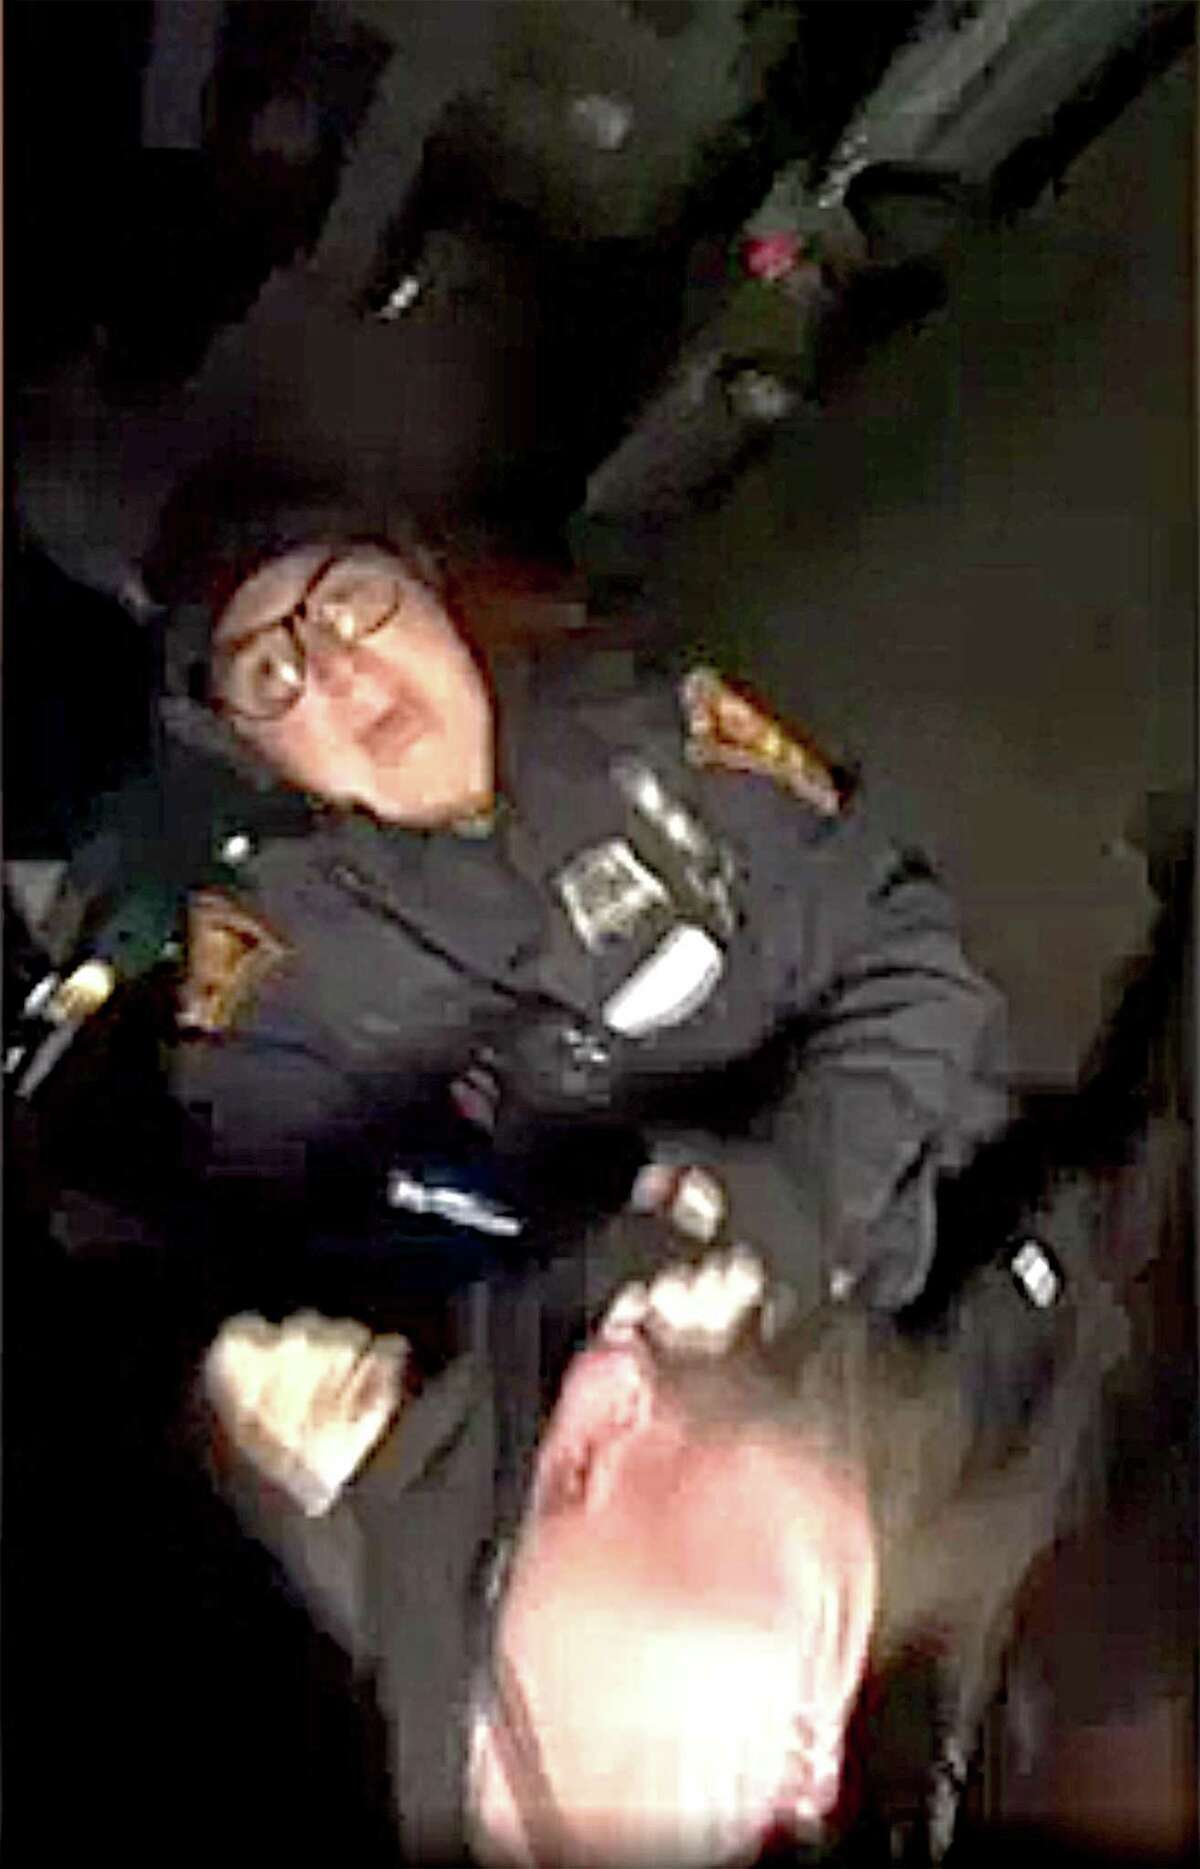 An image taken from a cell phone video shows Bridgeport Police Officer Christina Arroyo during the arrest of Aaron Kearney, 18, of Bridgeport following a traffic accident last Friday evening, Nov. 10, 2017. Arroyo and other officers have been placed on administrative status after allegations that they beat Kearney in the incident. Credit: Contributed